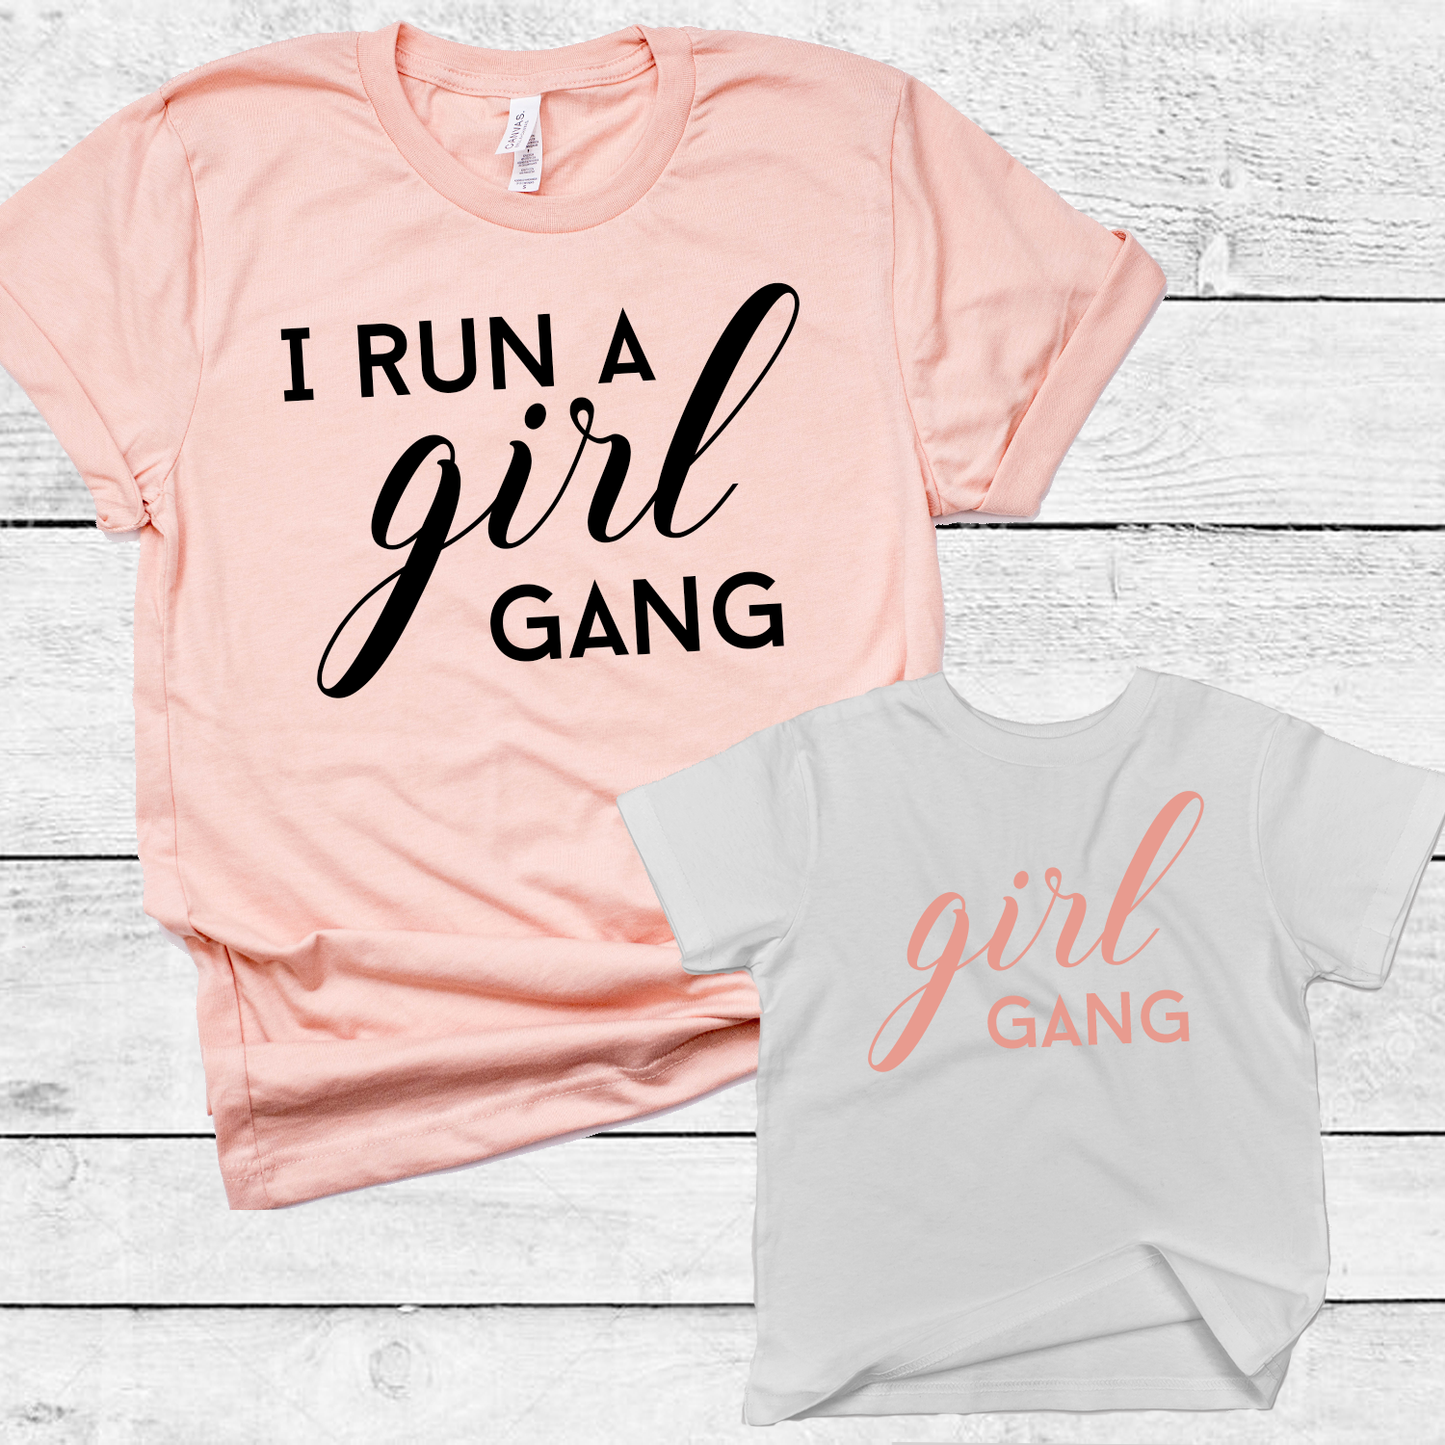 Girl Gang white T-Shirt   Top baby, toddler and kids sizes